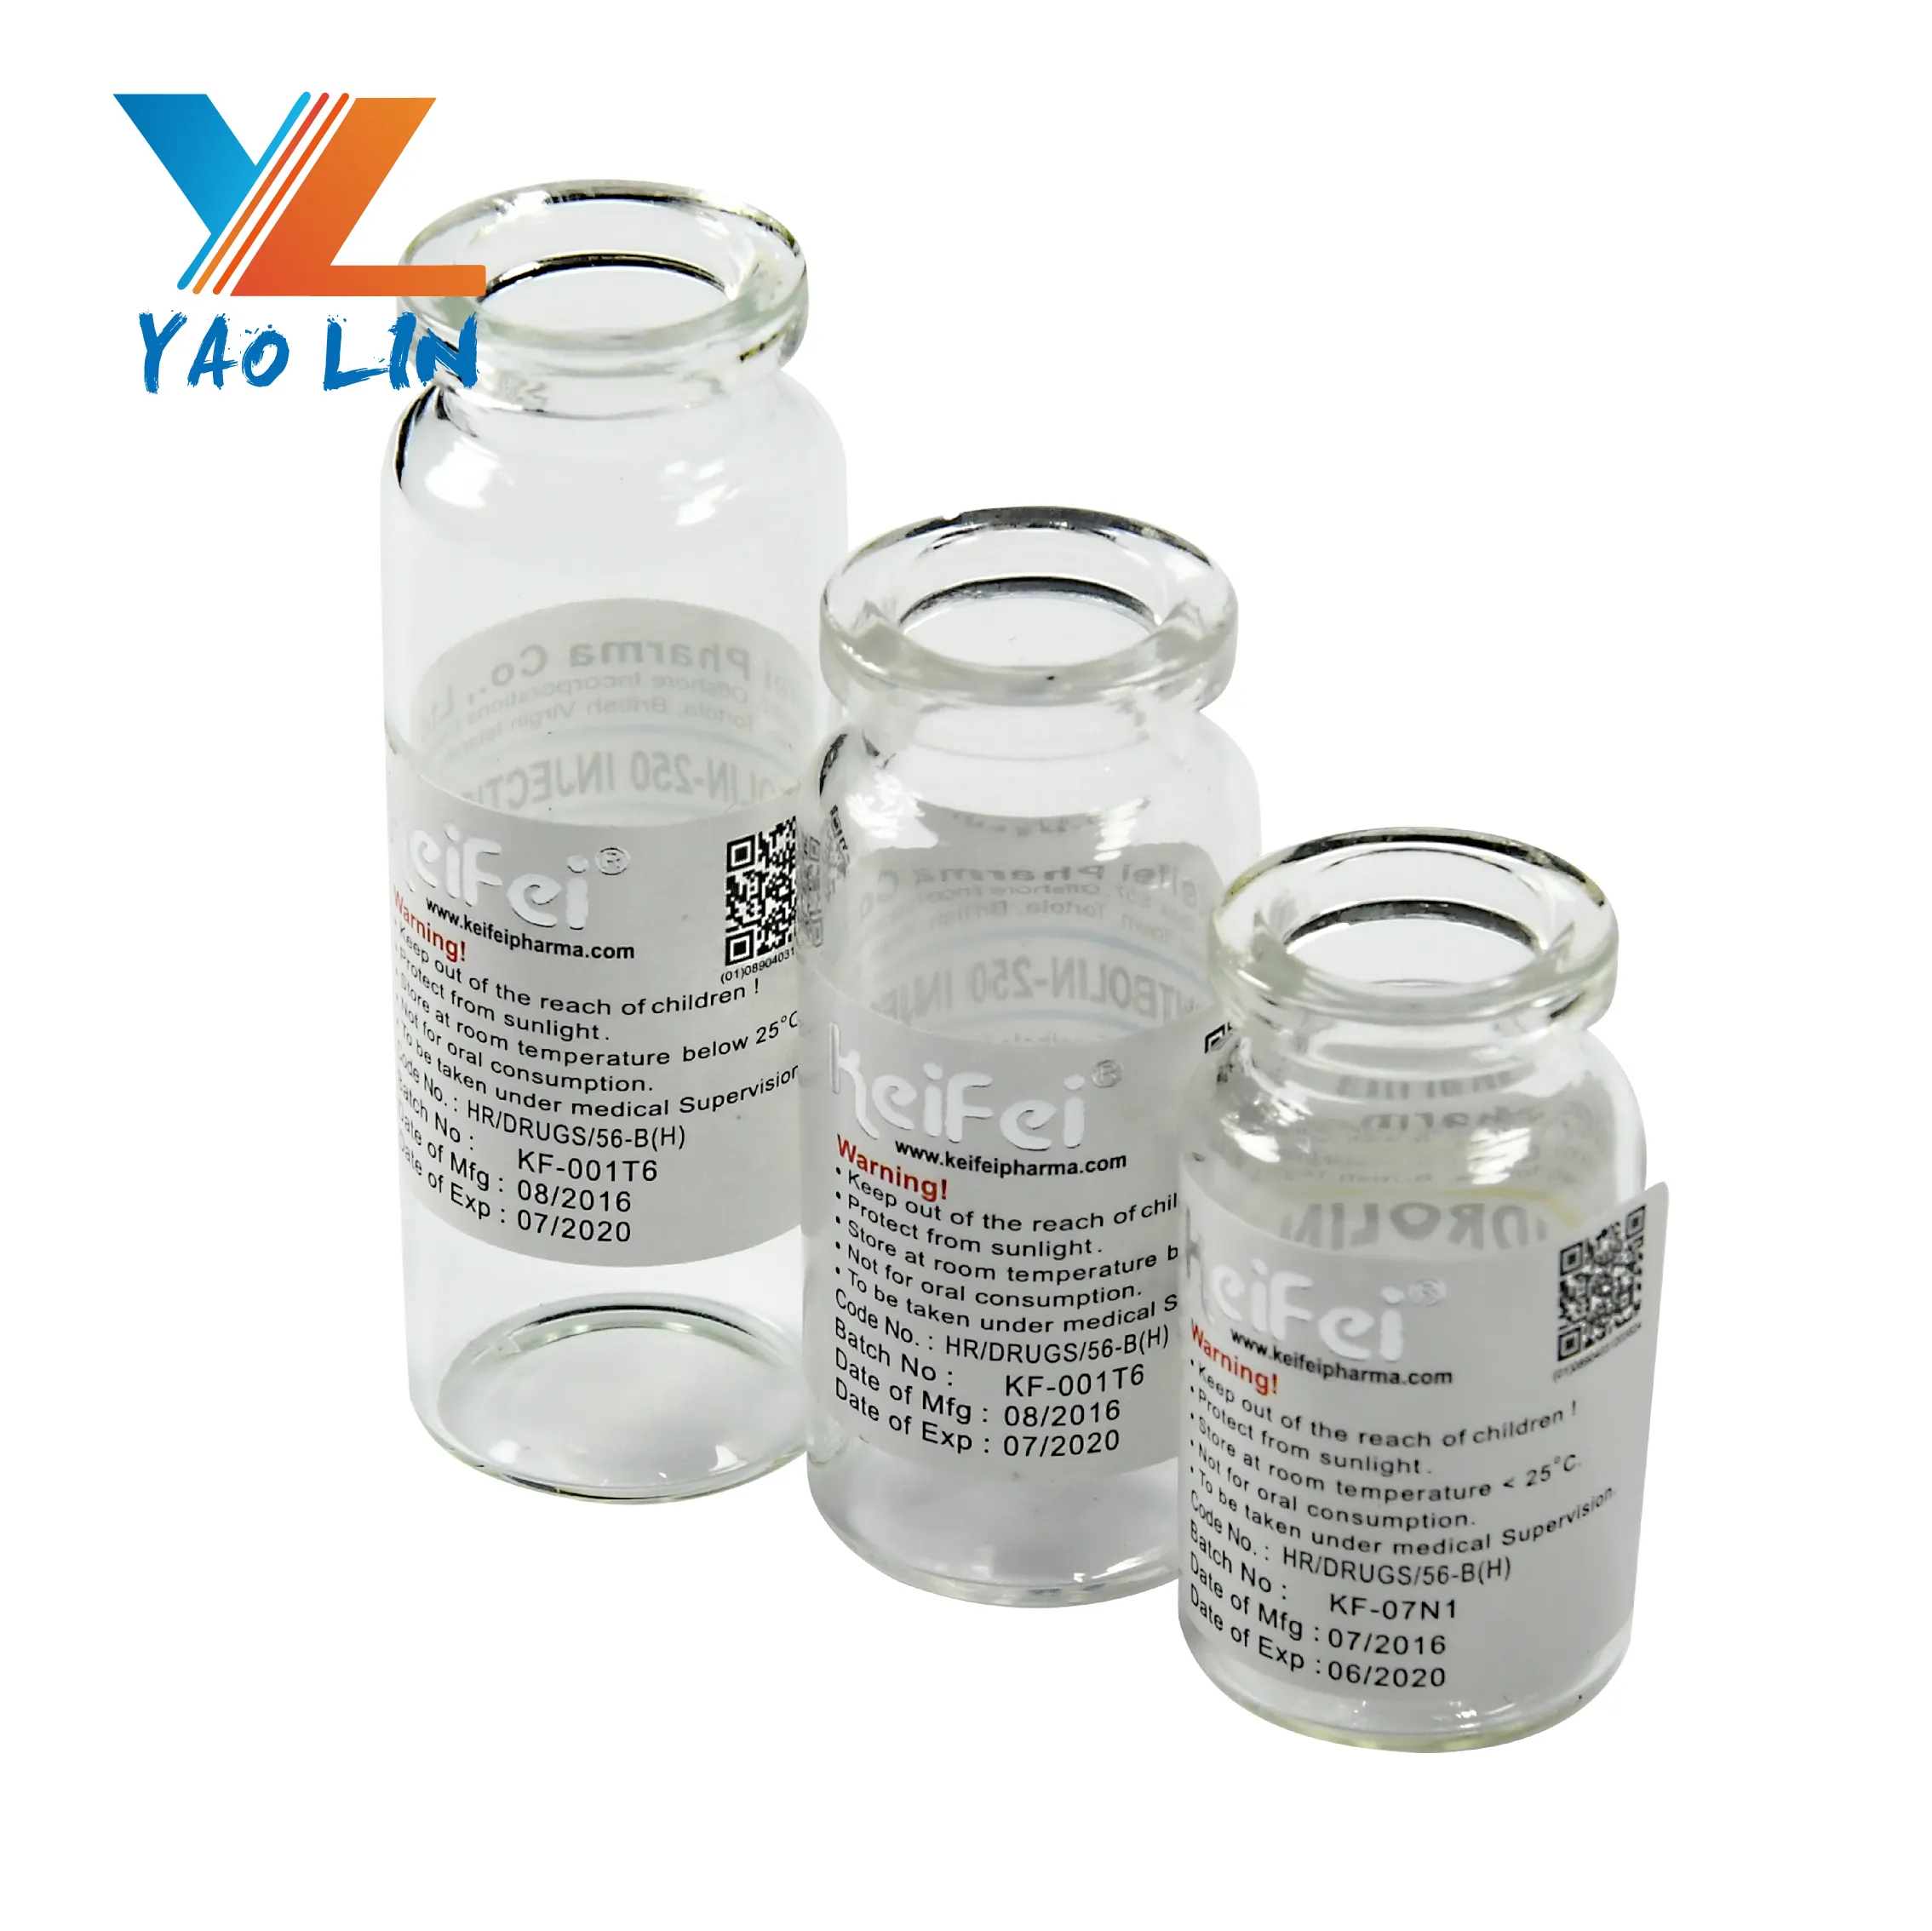 10ml glass injection vials bottle with rubber stopper and cap